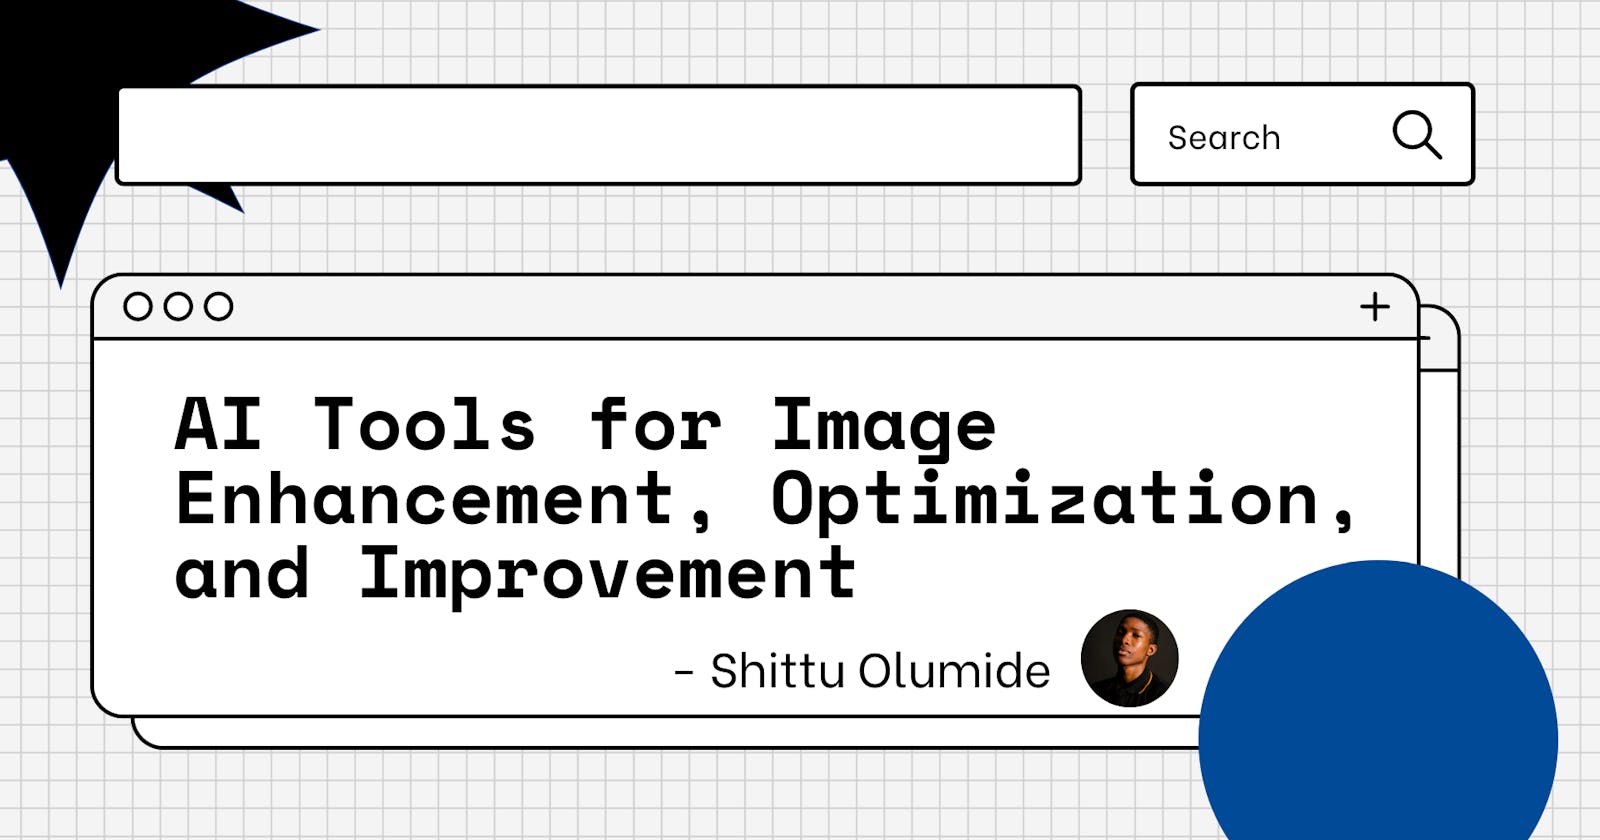 AI Tools for Image Enhancement, Optimization, and Improvement